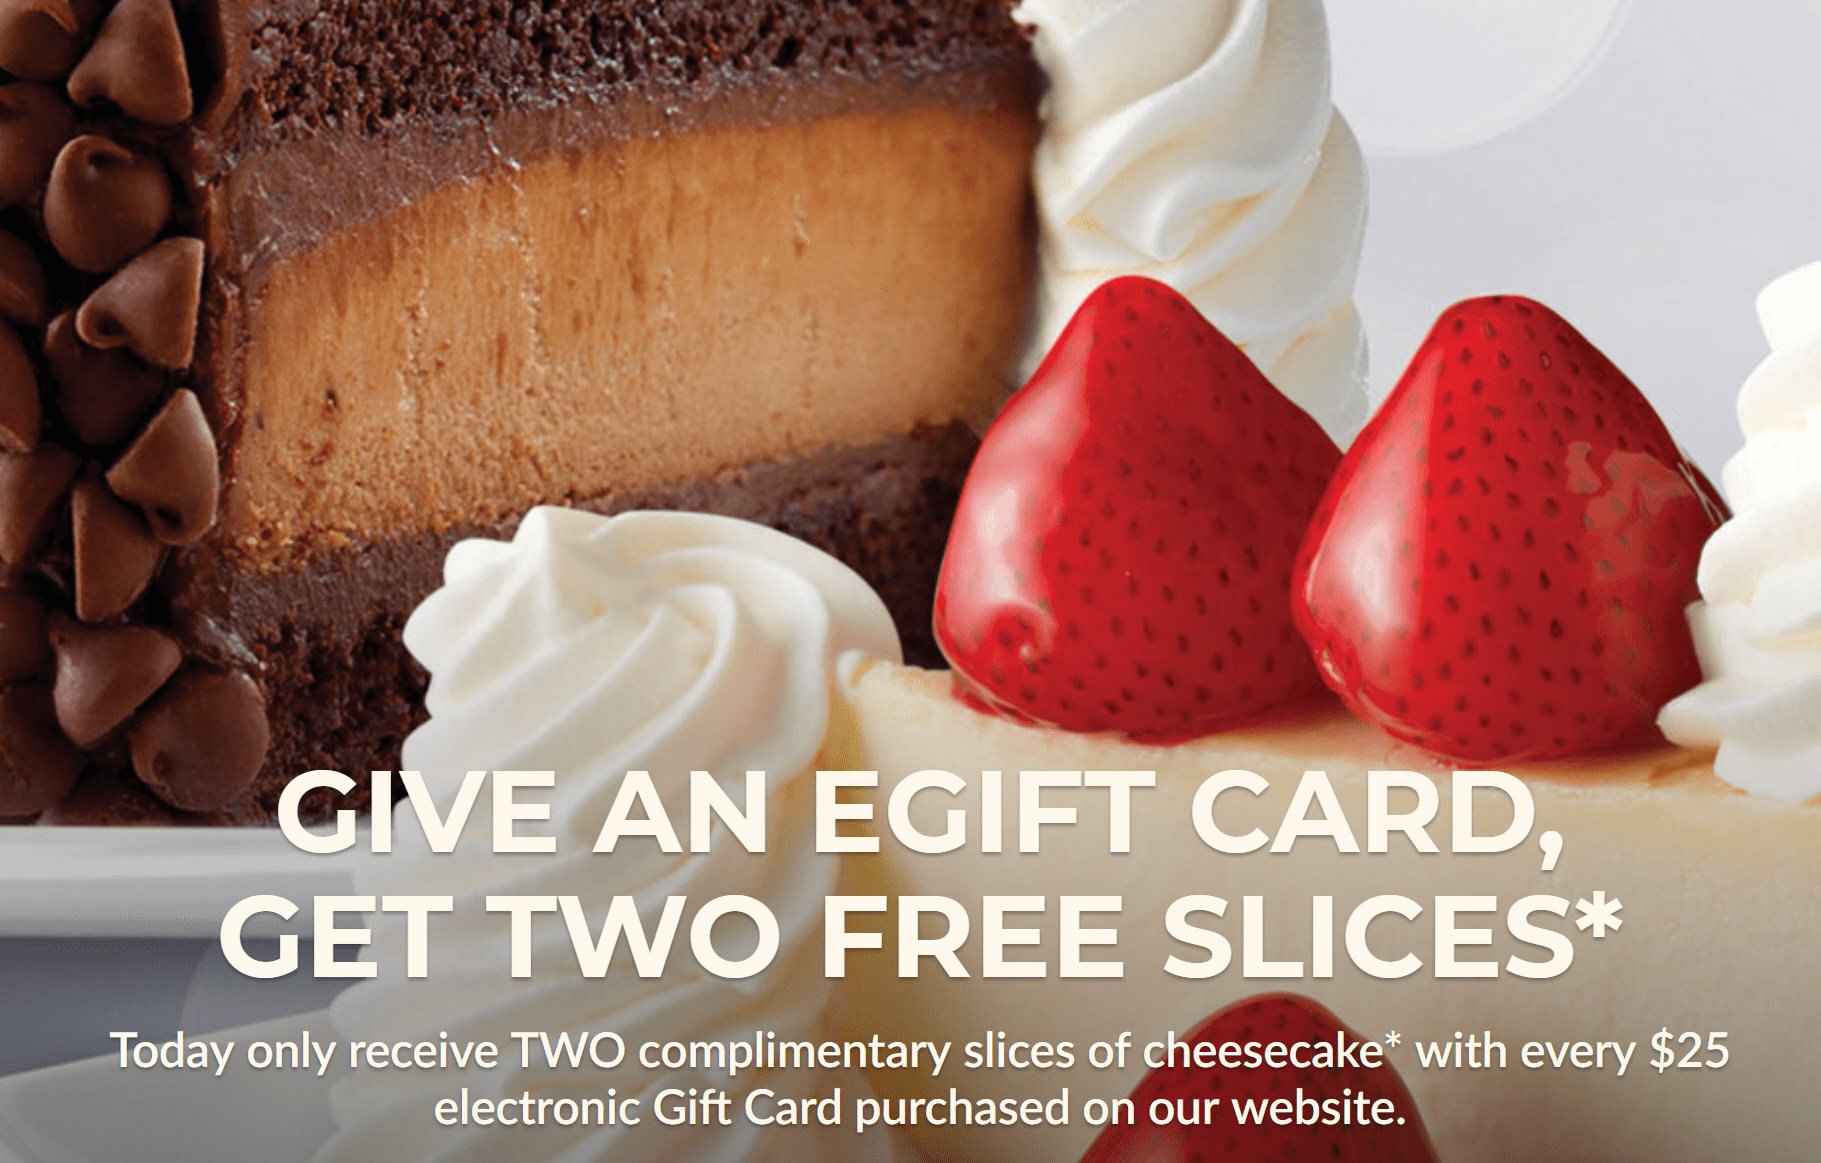 The Cheesecake Factory: 2 FREE Slices With A $25 Gift Card (12/20 ONLY)